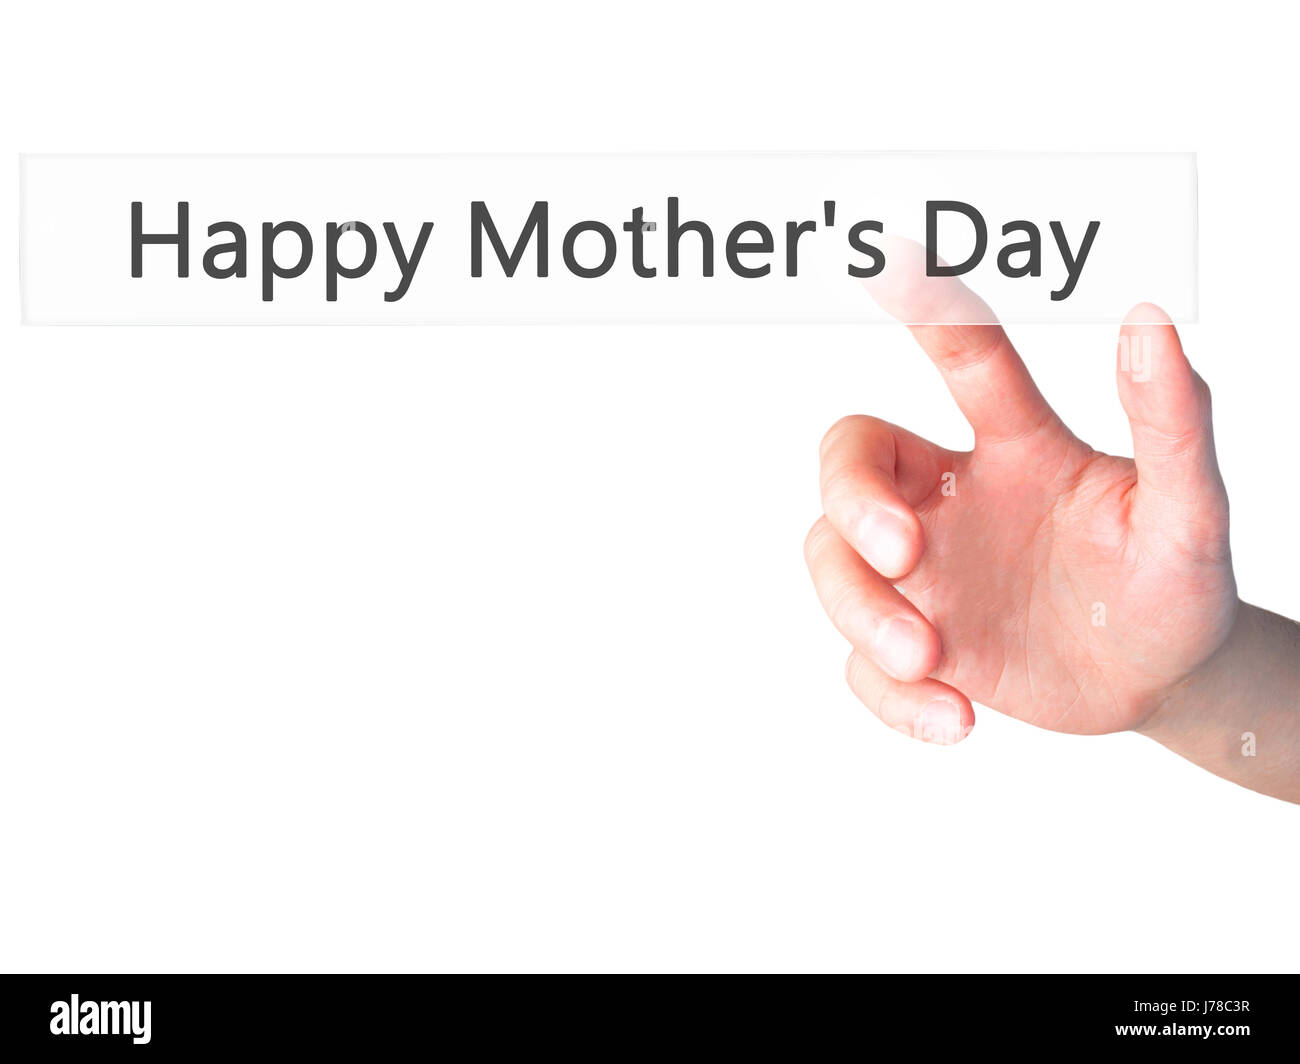 Happy Mother's Day - Hand pressing a button on blurred background concept . Business, technology, internet concept. Stock Photo Stock Photo